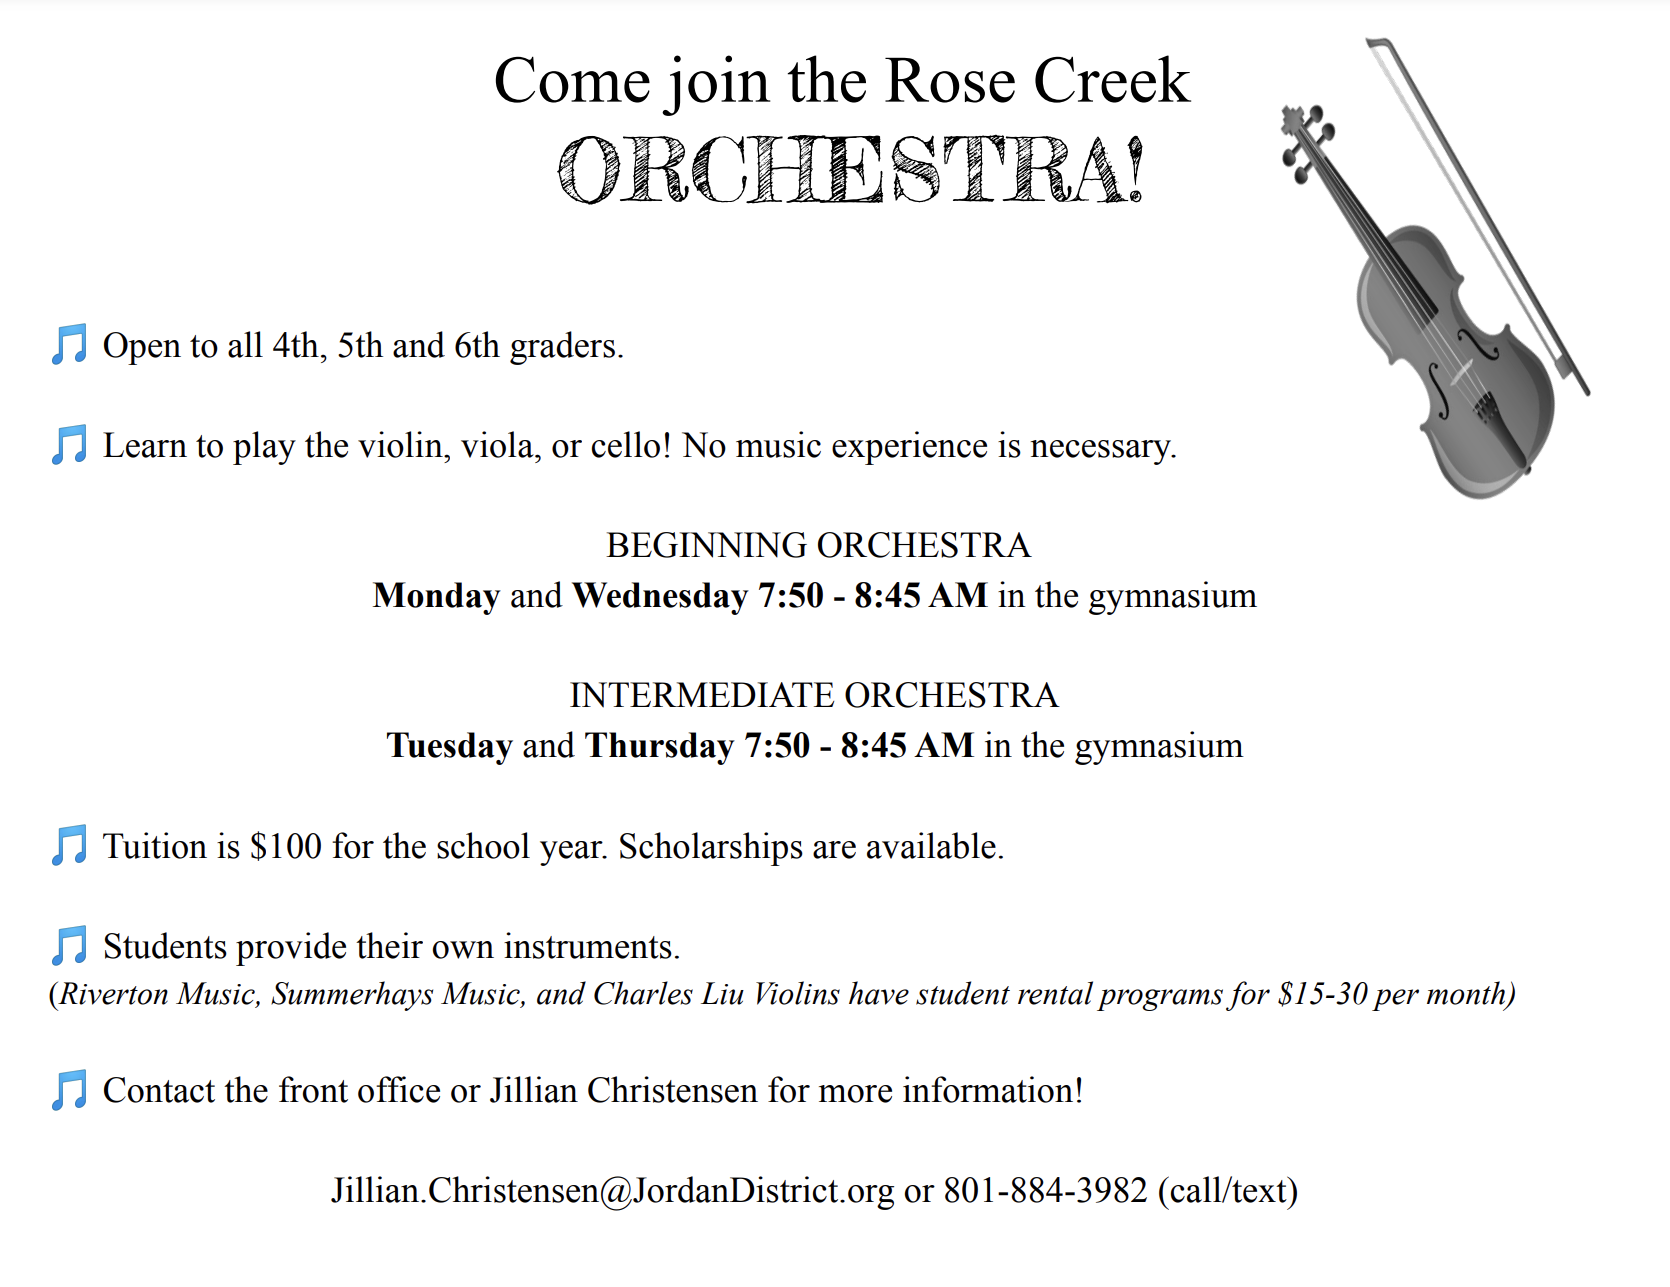 Come join the Rose Creek ORCHESTRA! I Open to all 4th, 5th and 6th graders! Learn to play the violin, viola, or cello! No music experience is necessary! I BEGINNING ORCHESTRA: Monday and Wednesday 7:50 - 8:45 AM in the gymnasium A INTERMEDIATE ORCHESTRA: Tuesday and Thursday 7:50 - 8:45 AM in the gymnasium I Tuition is $100 for the school year (scholarships available!). Students provide their own instruments. (Riverton Music, Summerhays Music, and Charles Liu Violins have student rental programs for $15-30 per month) A Contact Jillian Christensen for more information! Jillian. Christensen@JordanDistrict.org or 801-884-3982 (call/text)